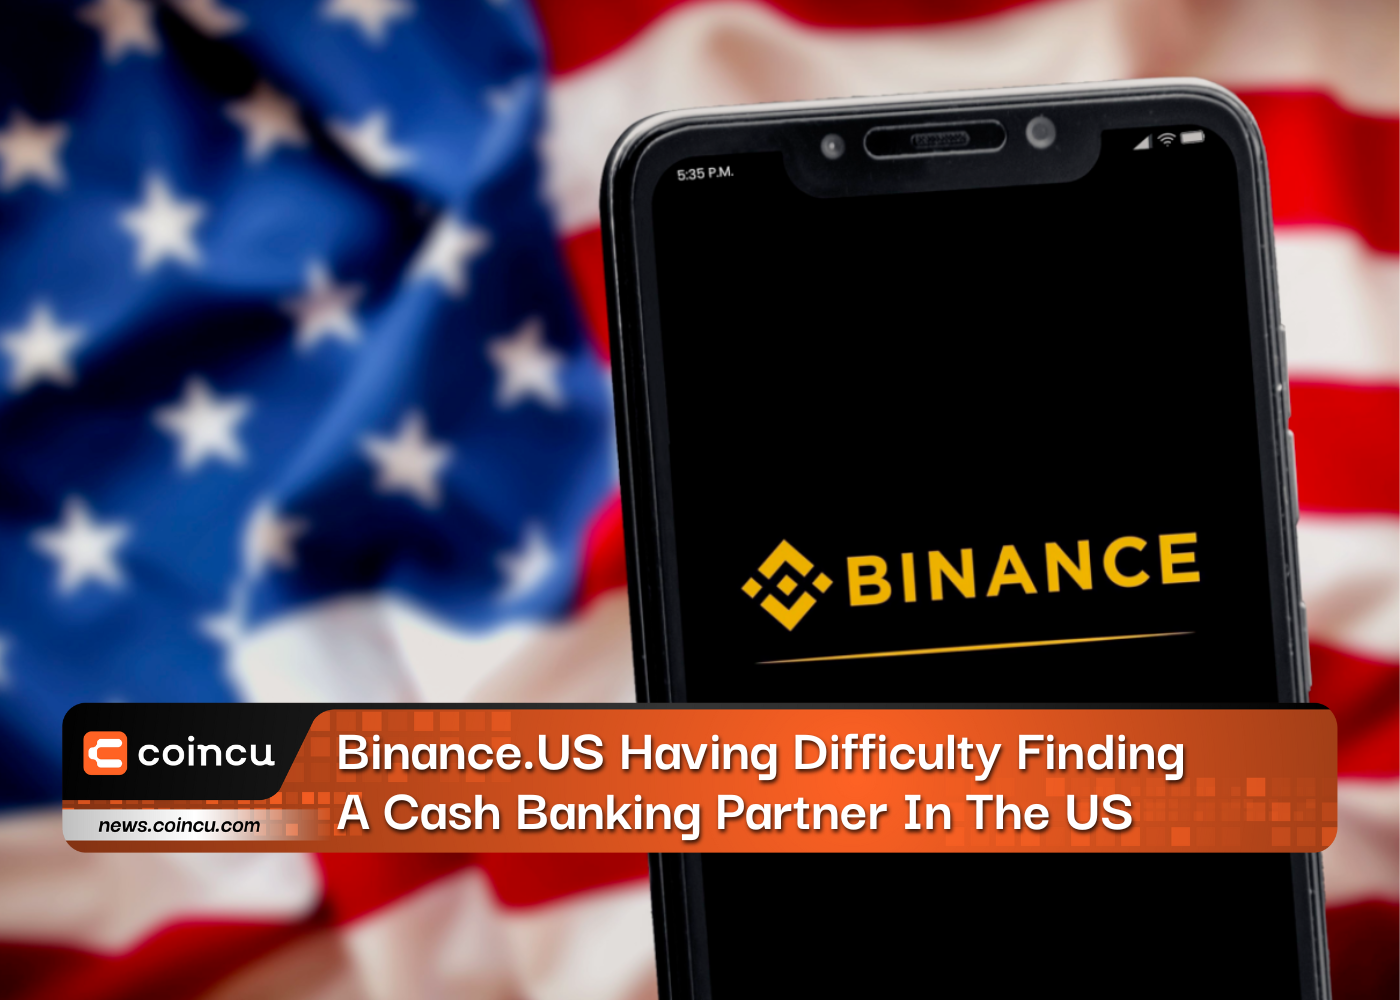 Binance.US Having Difficulty Finding A Cash Banking Partner In The US